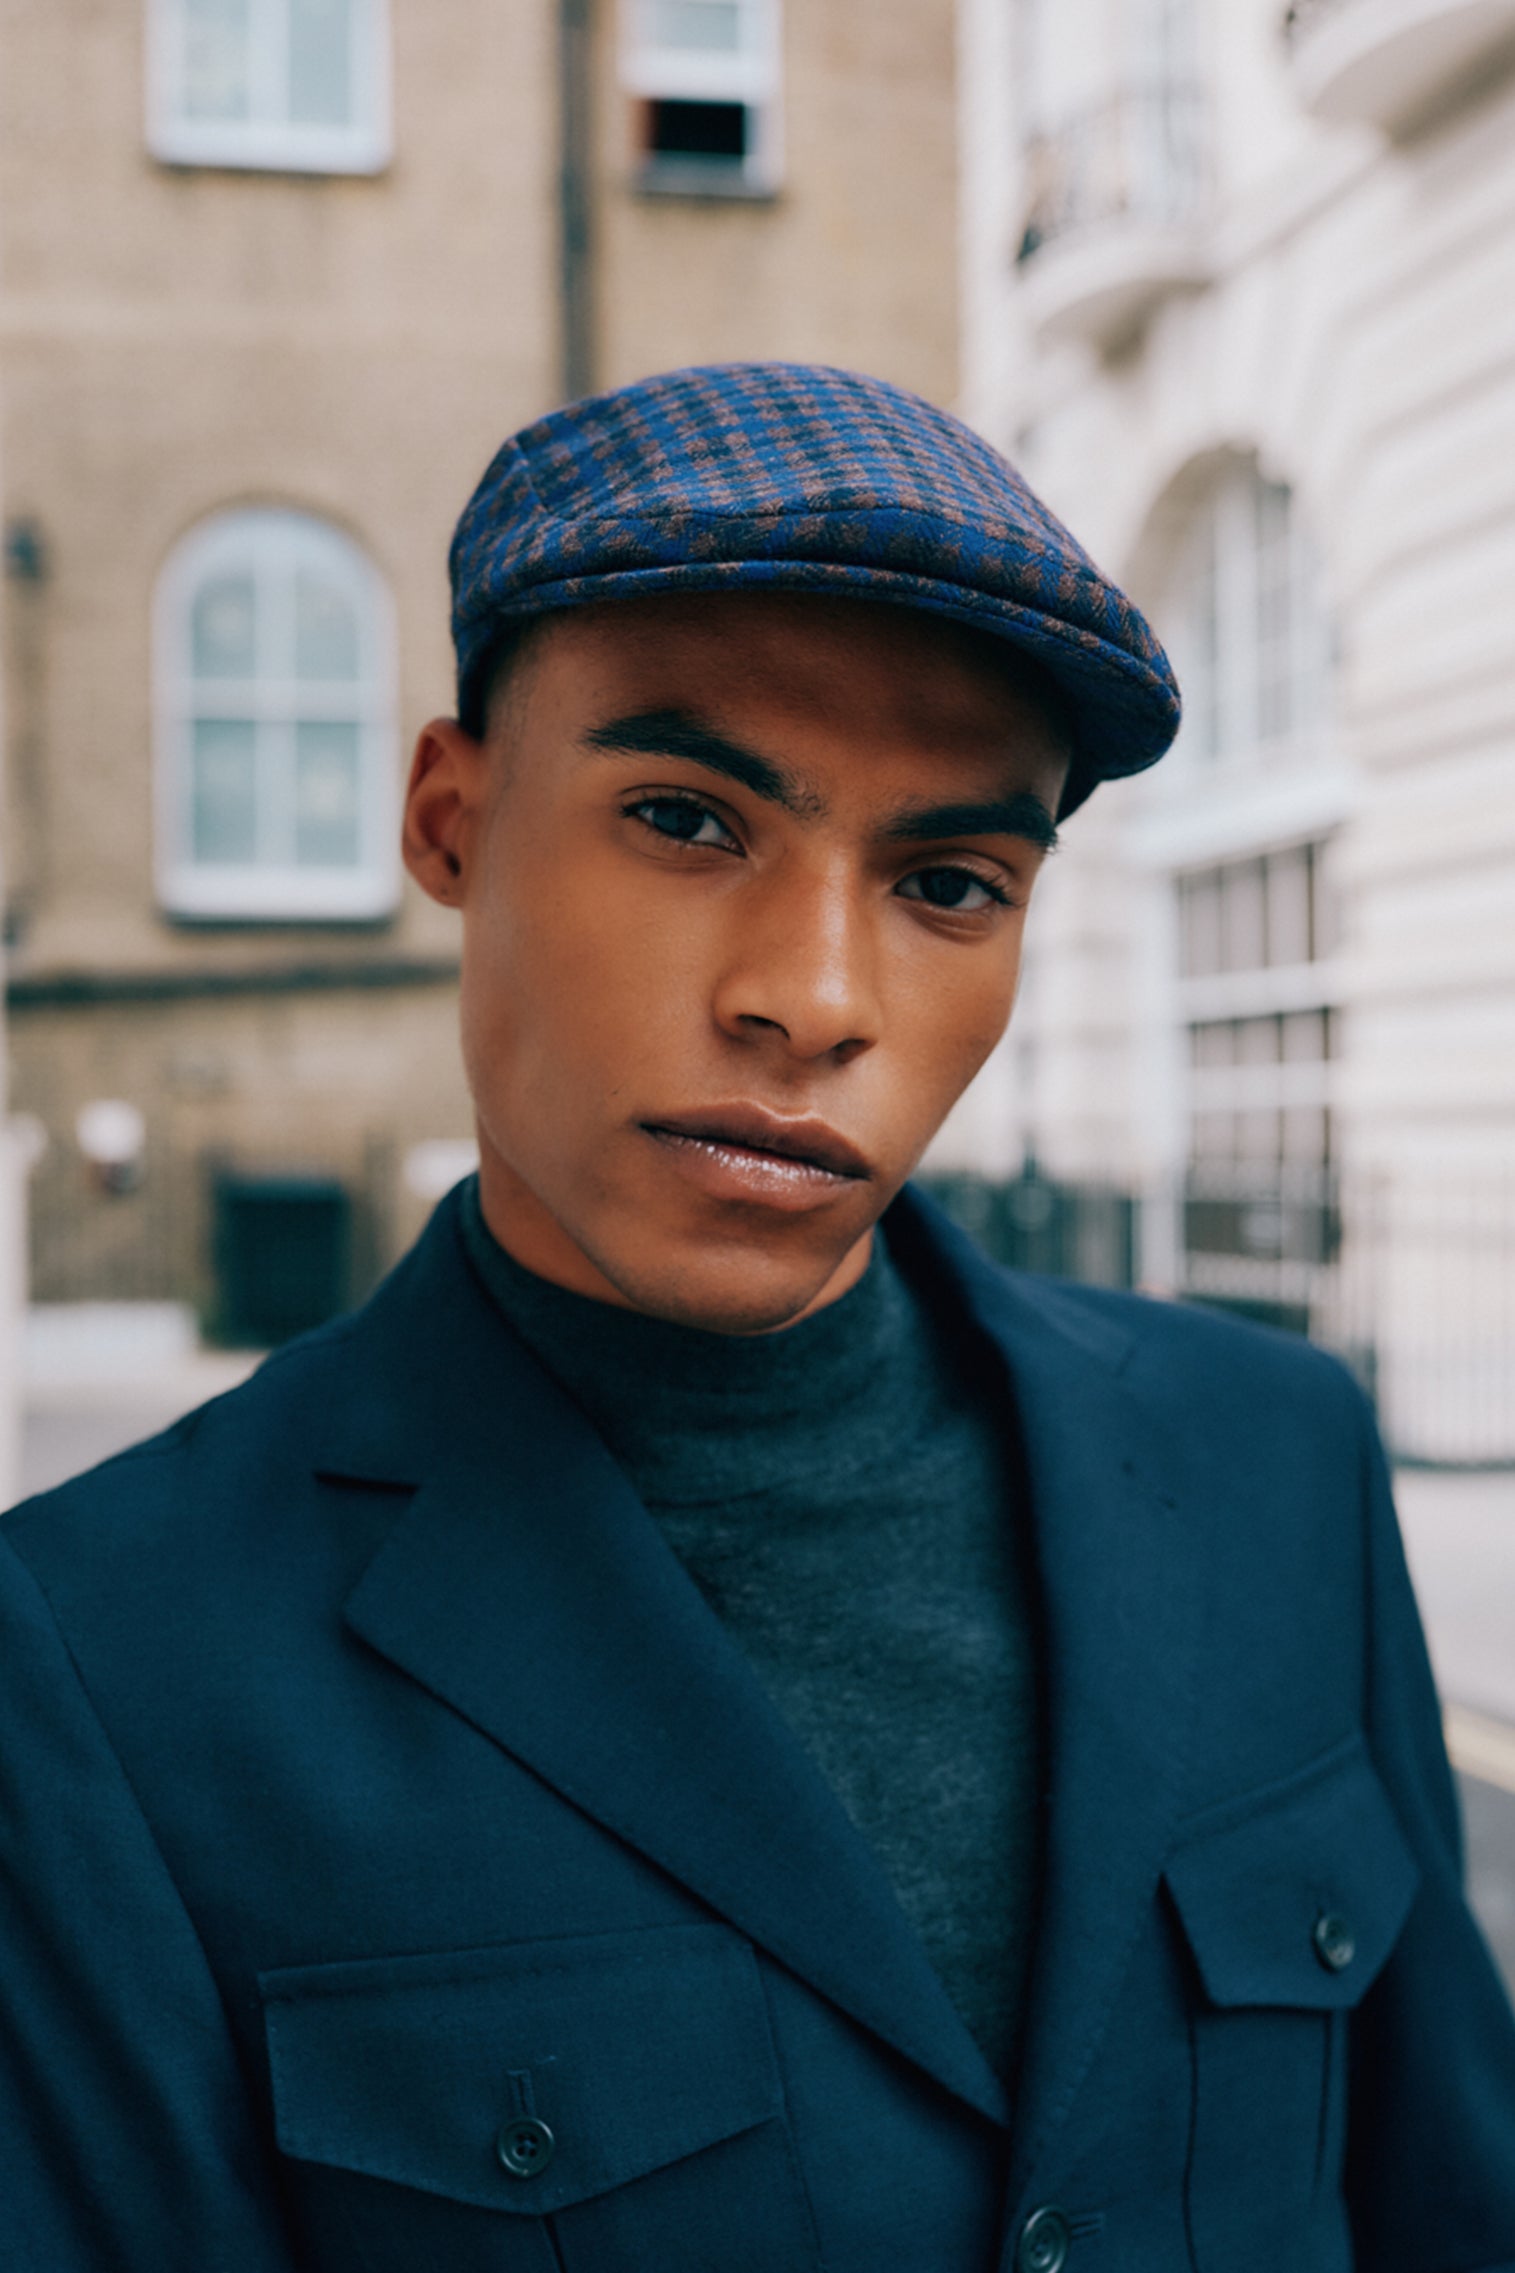 Grosvenor Check Flat Cap - Hats for Oval Face Shapes - Lock & Co. Hatters London UK